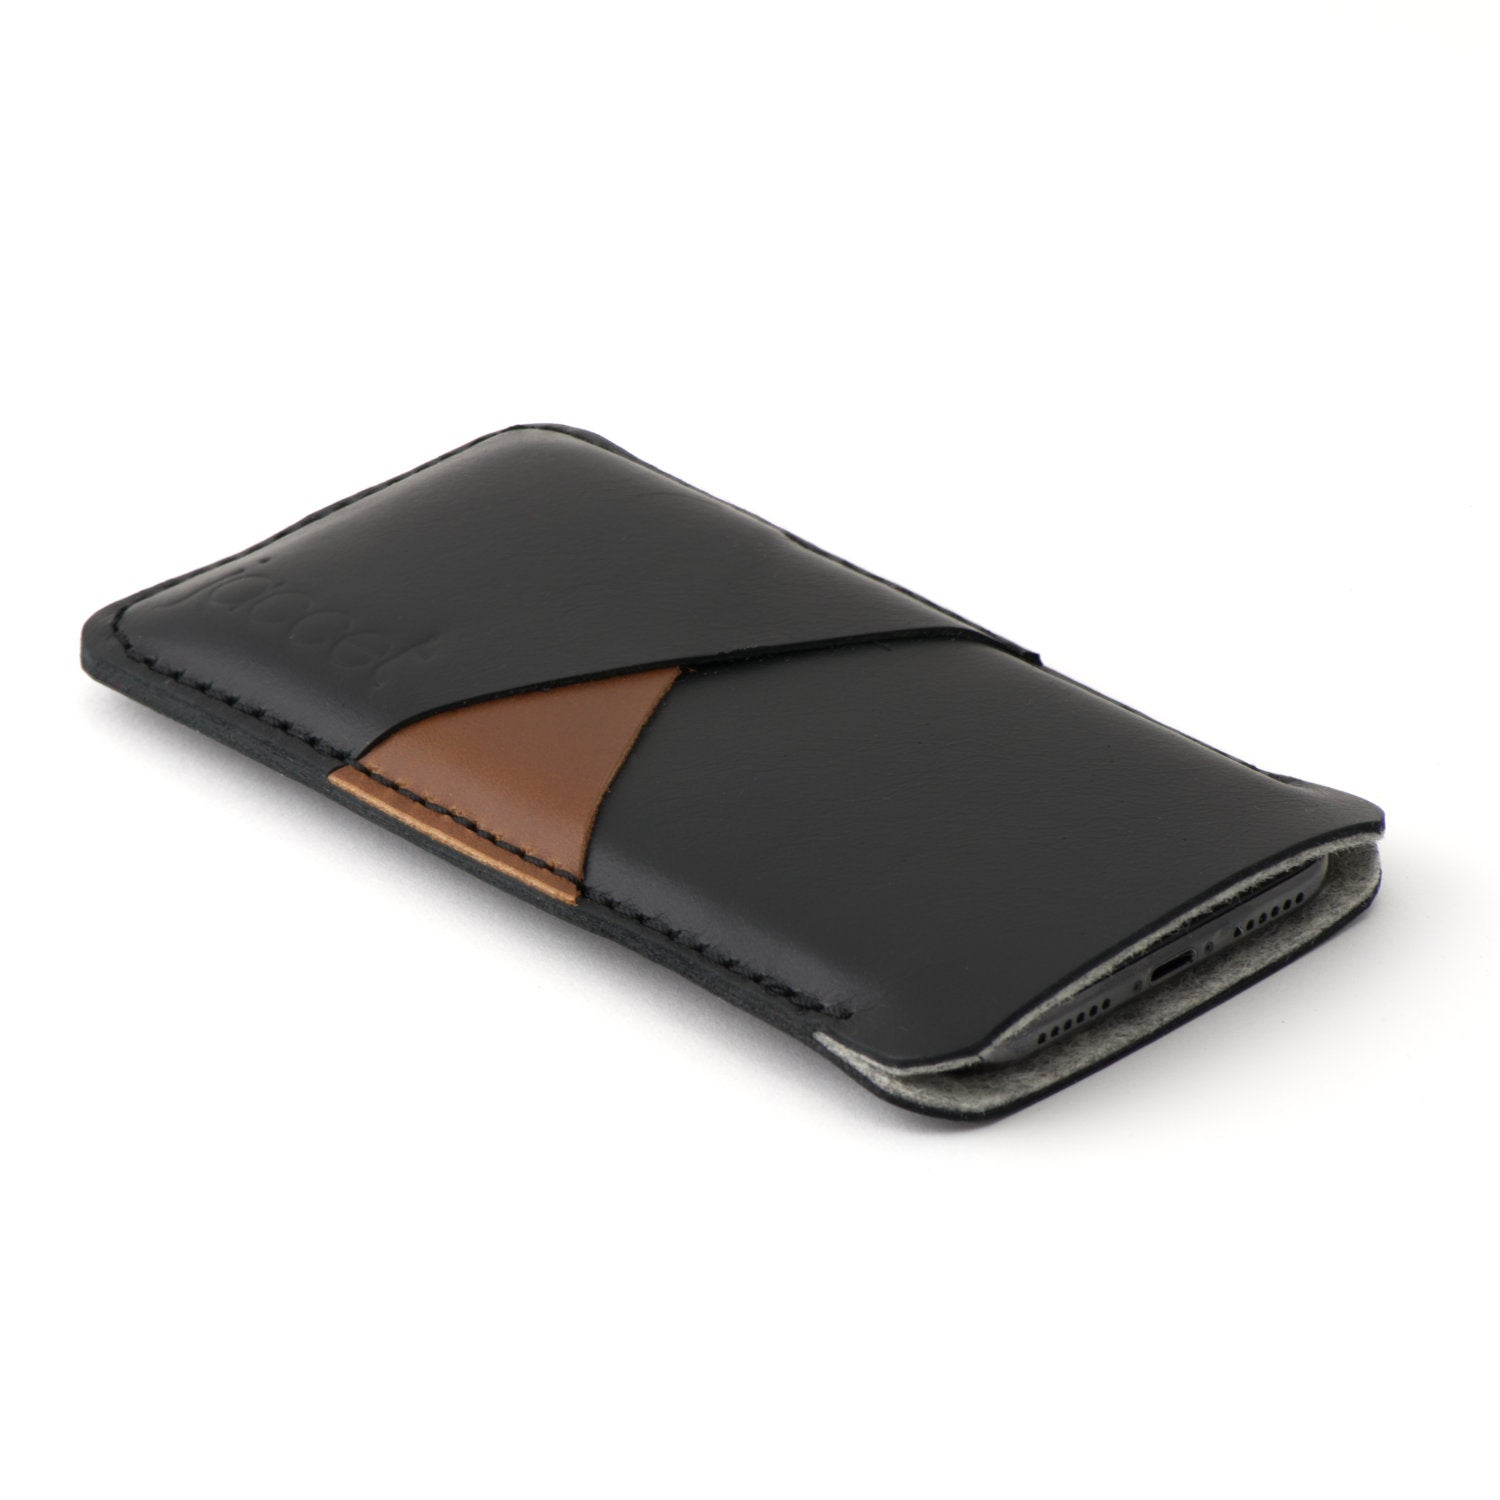 Full-grain leather Google Pixel sleeve - Black leather with two pockets voor cards